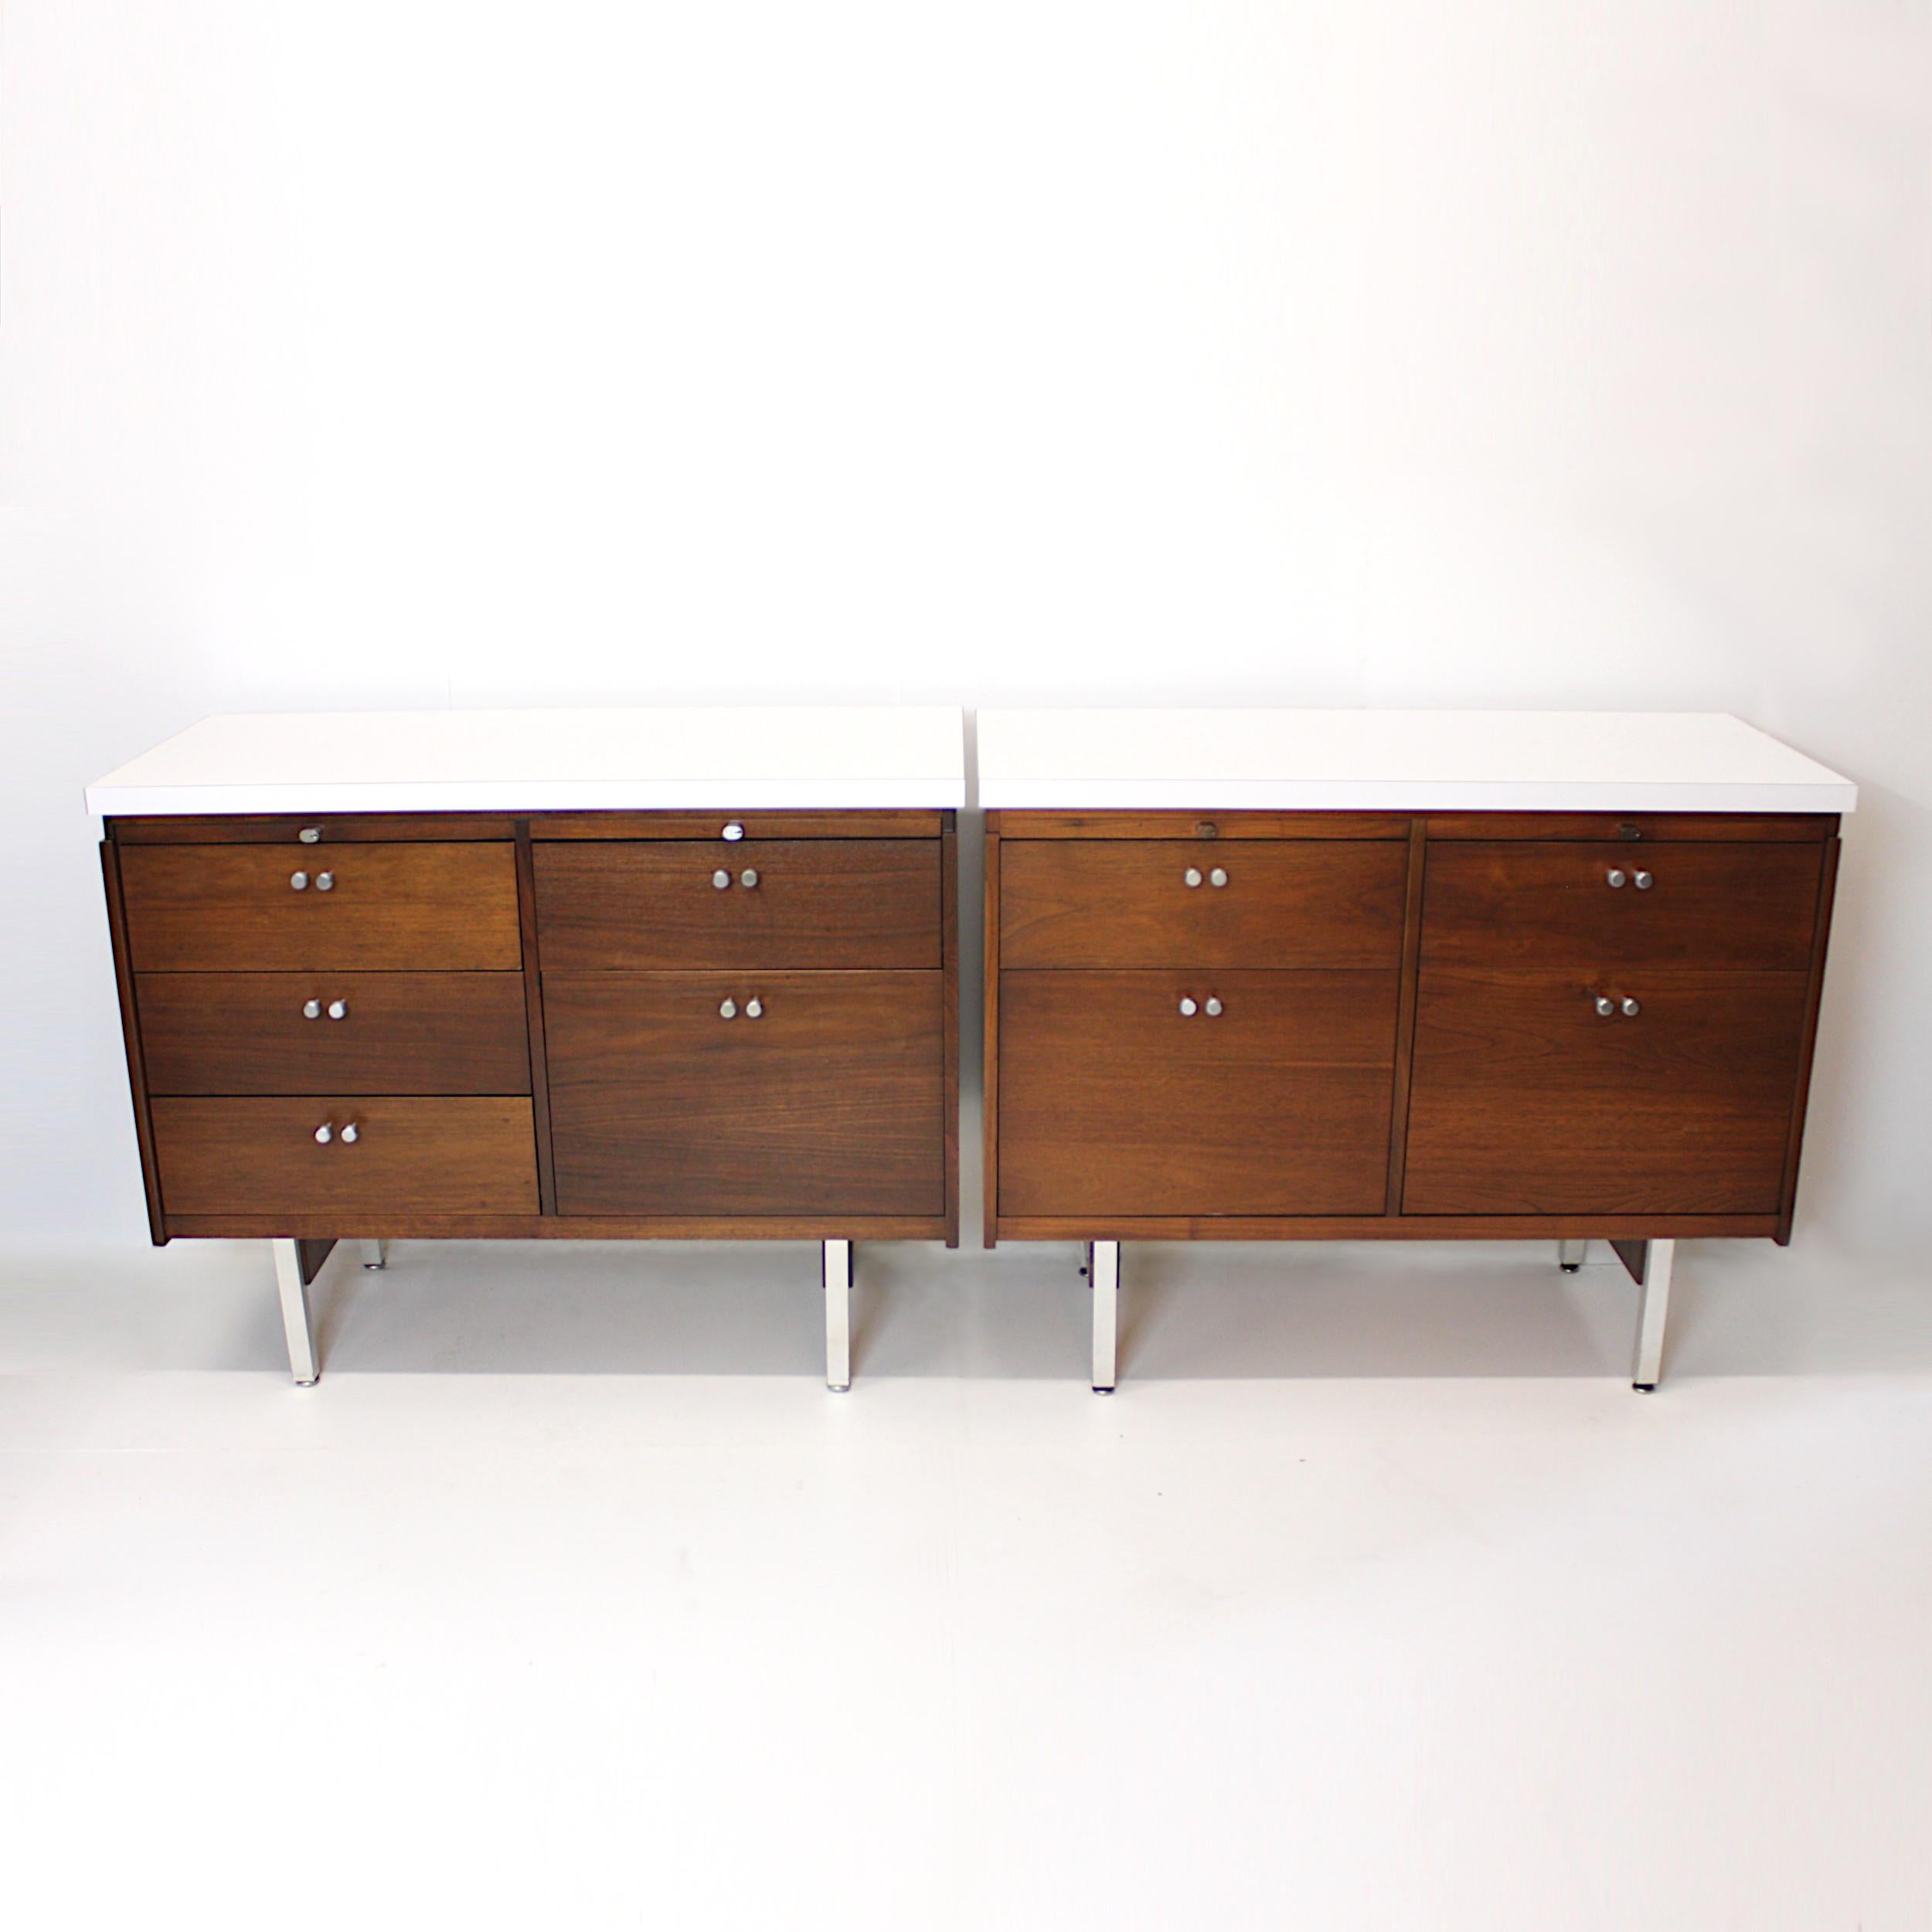 American Matching Pair of Mid-Century Modern Walnut Console Cabinets by Charles Deaton